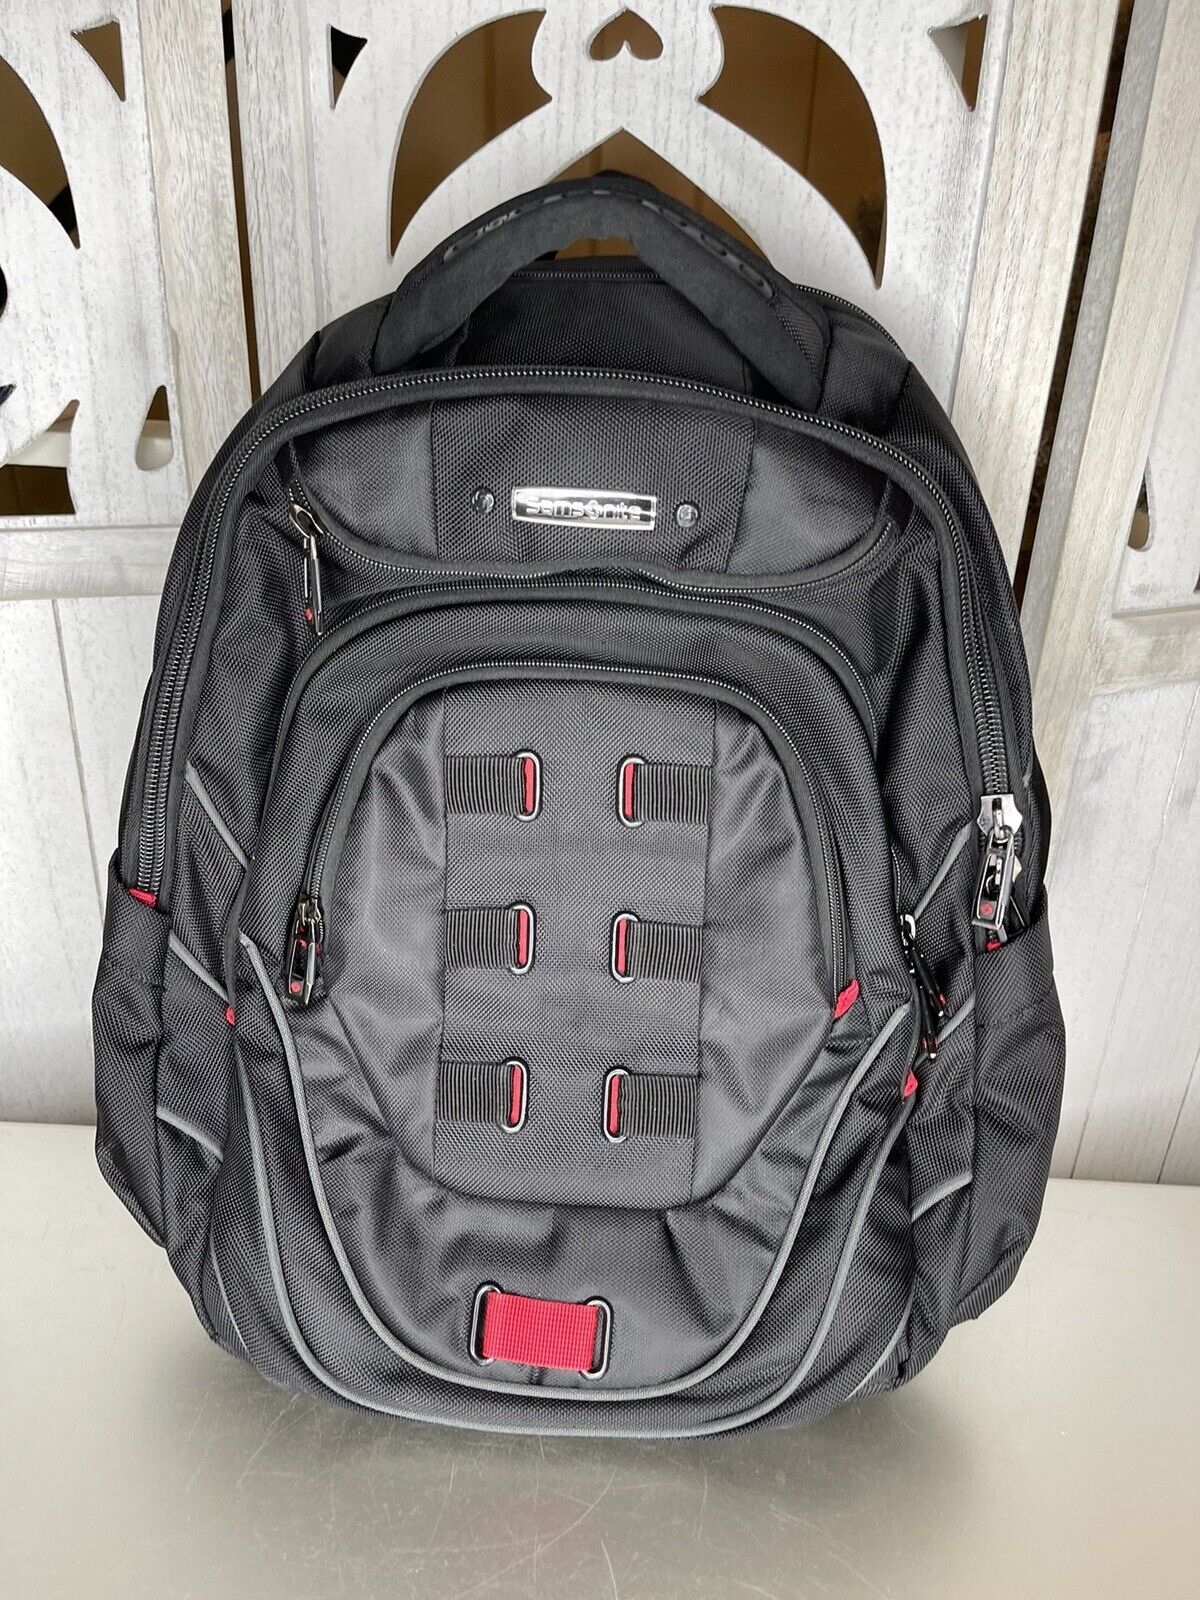 Samsonite Tectonic PFT Laptop Backpack Black Red 17-Inch Travel Carry All